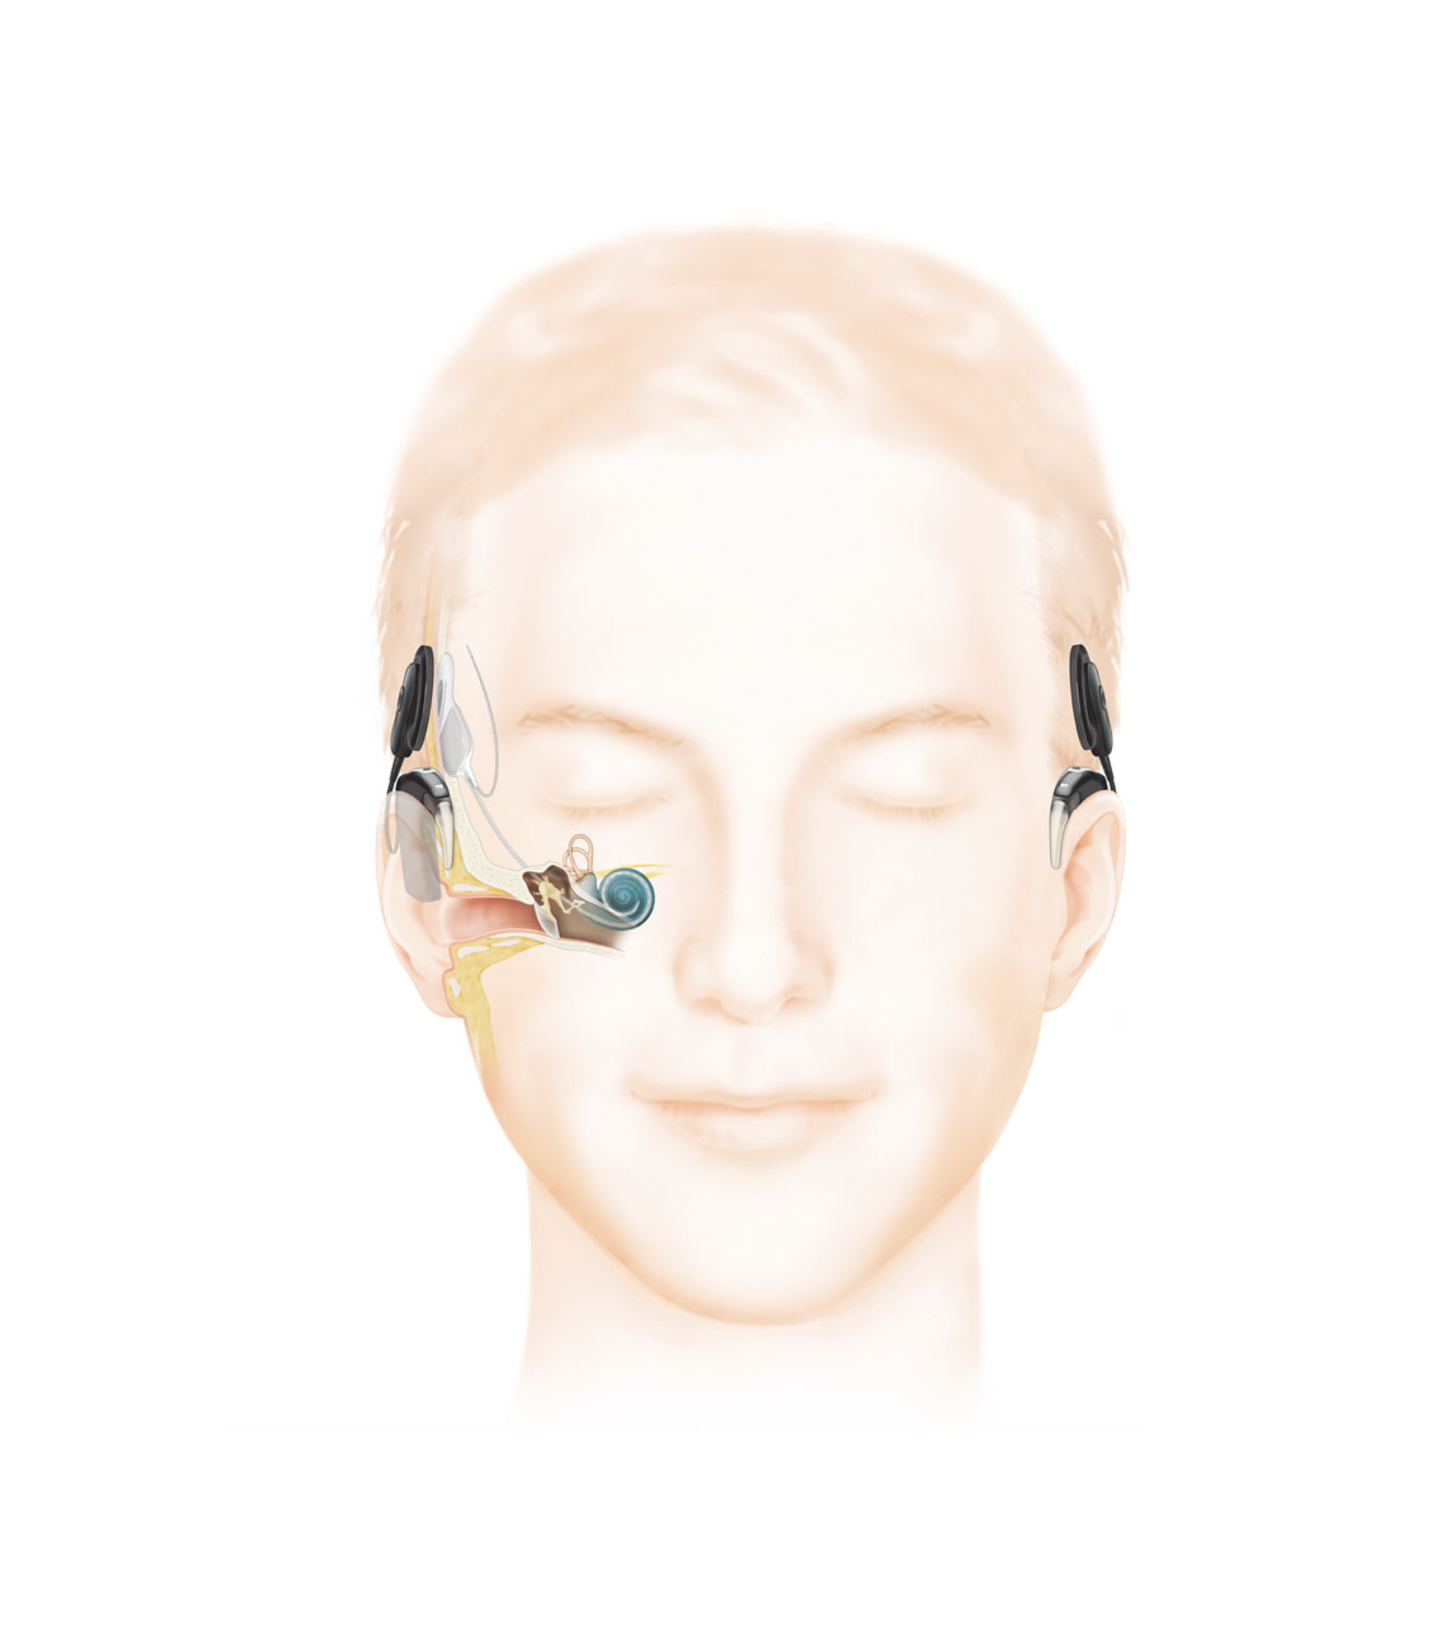 A diagram showing how a cochlear implant is inserted